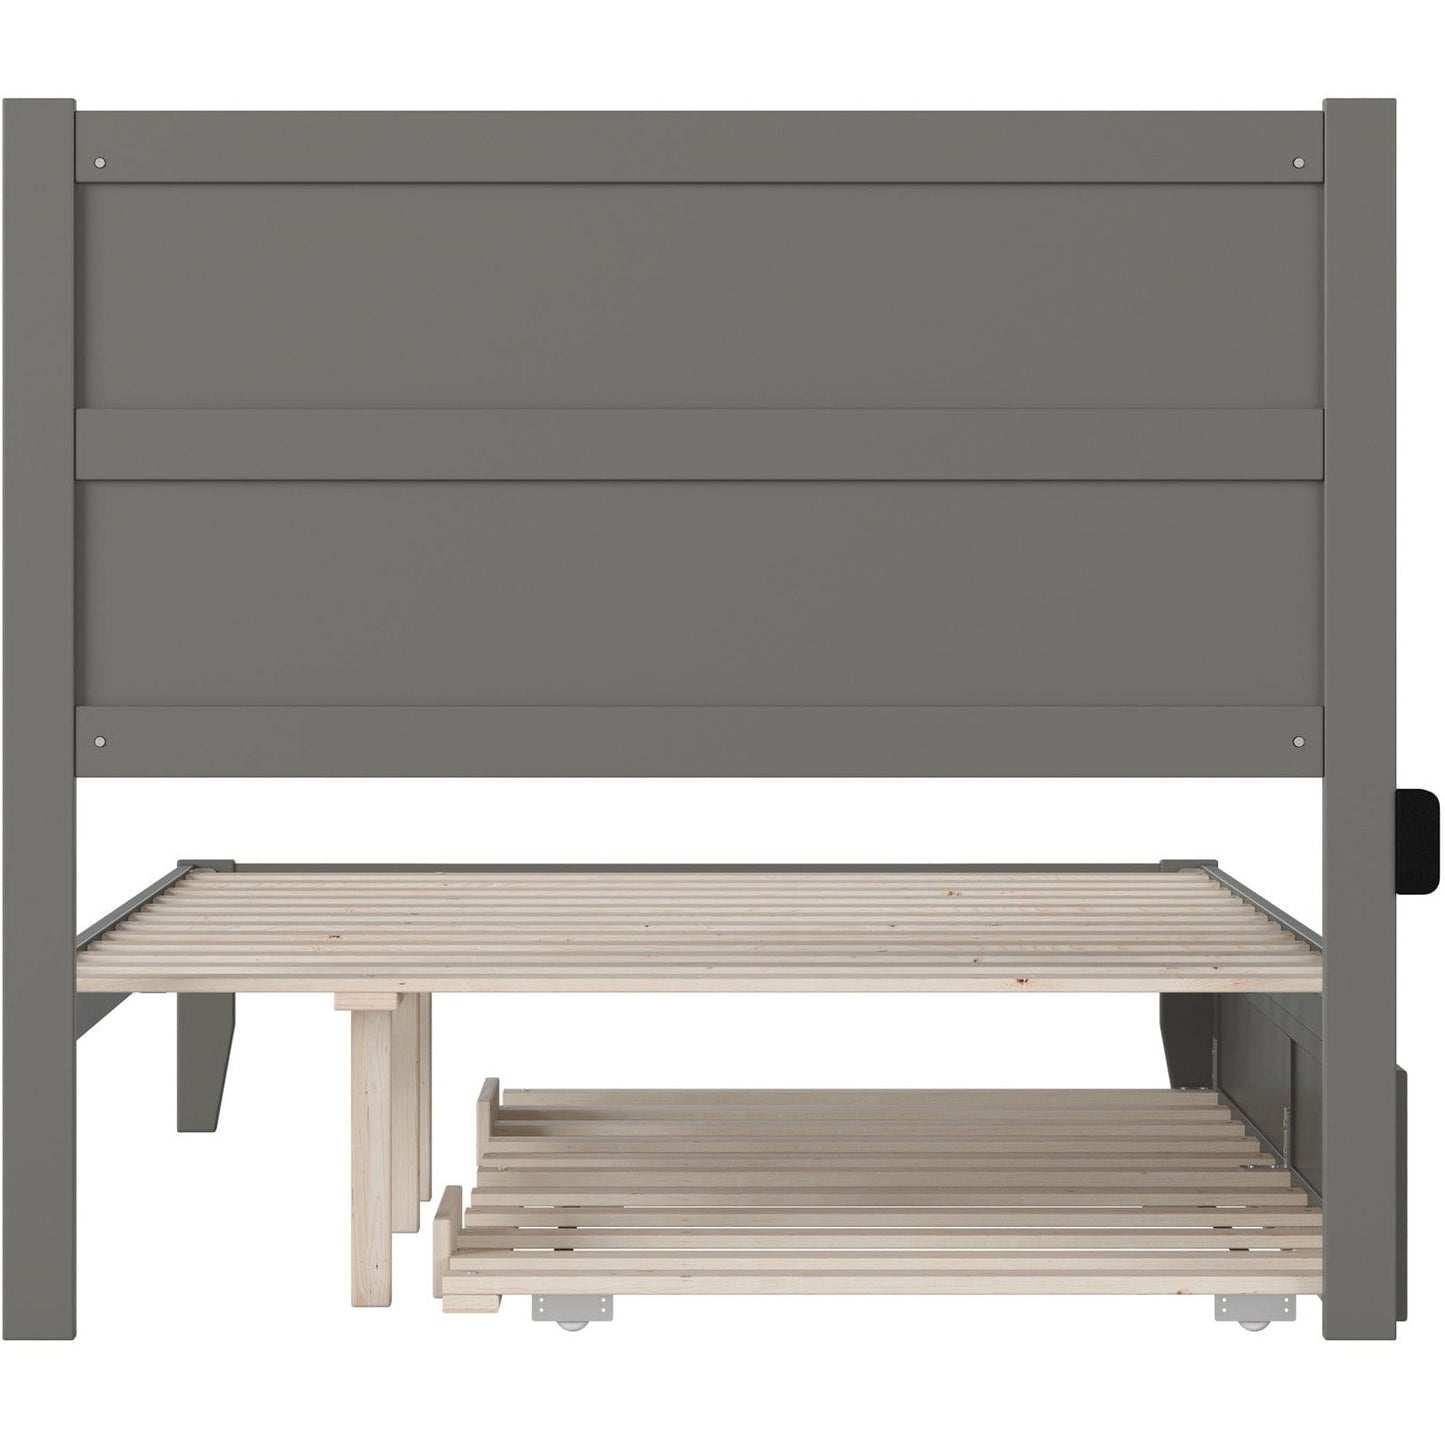 AFI Furnishings NoHo Full Bed with Twin Trundle in Grey AG9111239